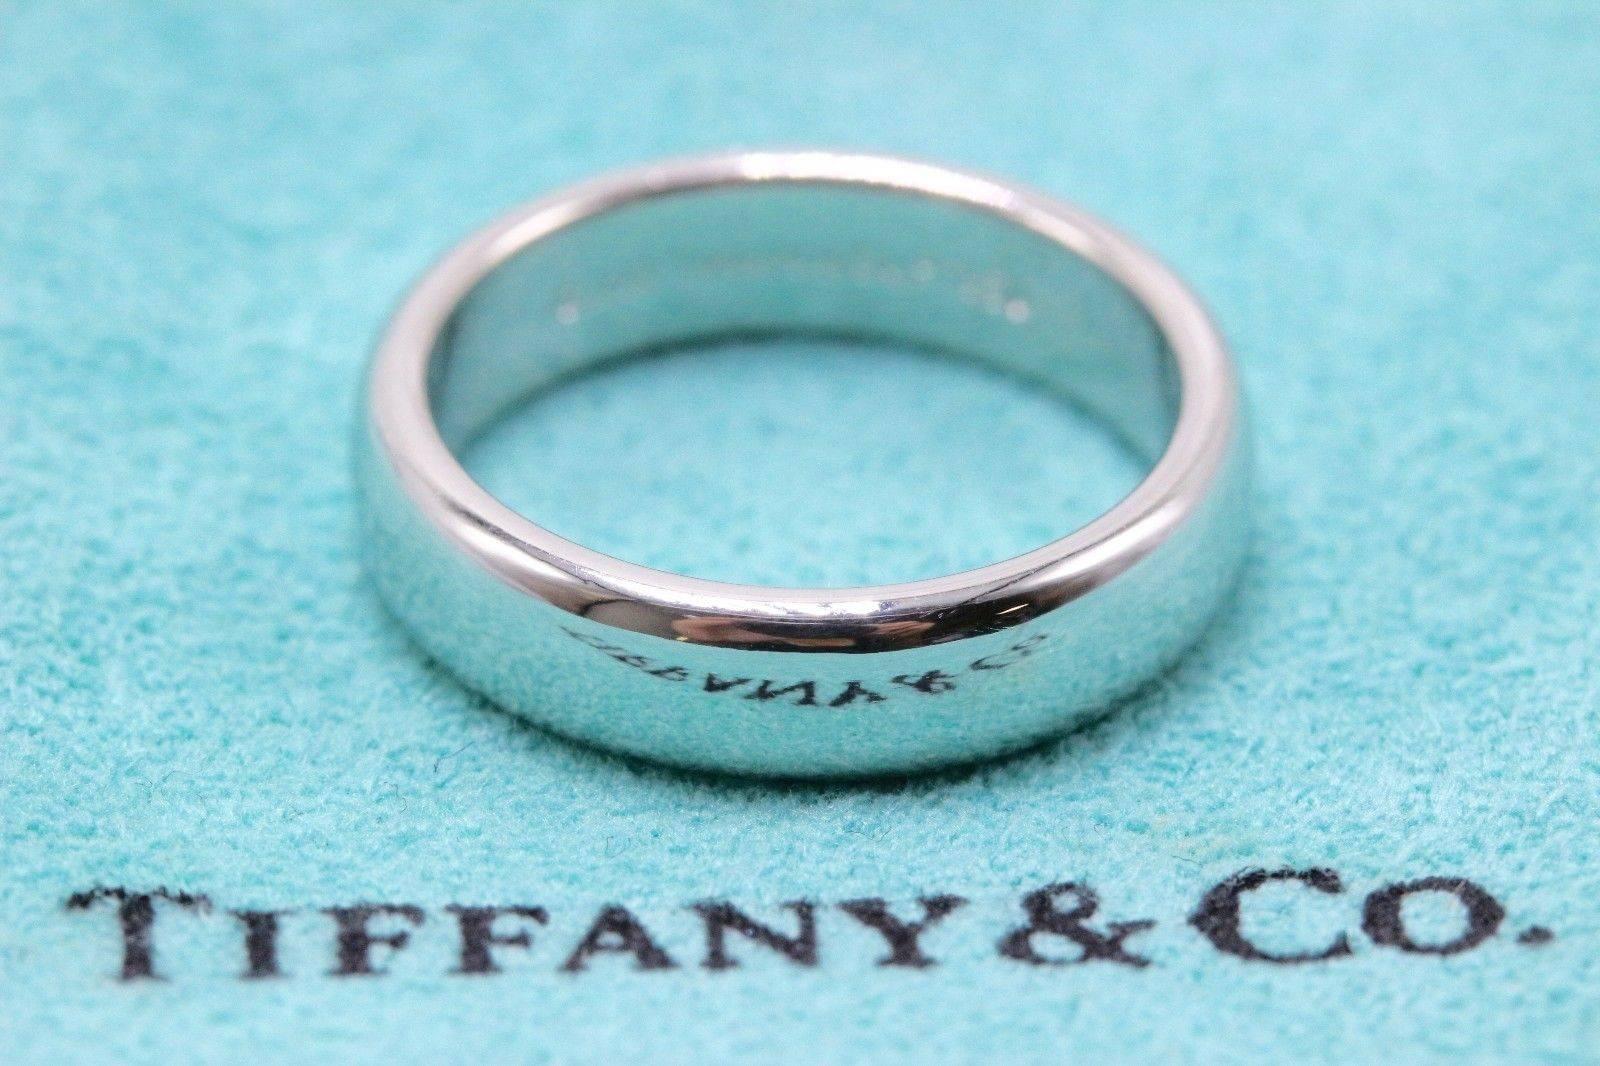 Tiffany & Co. Lucida Platinum Wedding Band Ring 4.5 MM In Excellent Condition For Sale In San Diego, CA